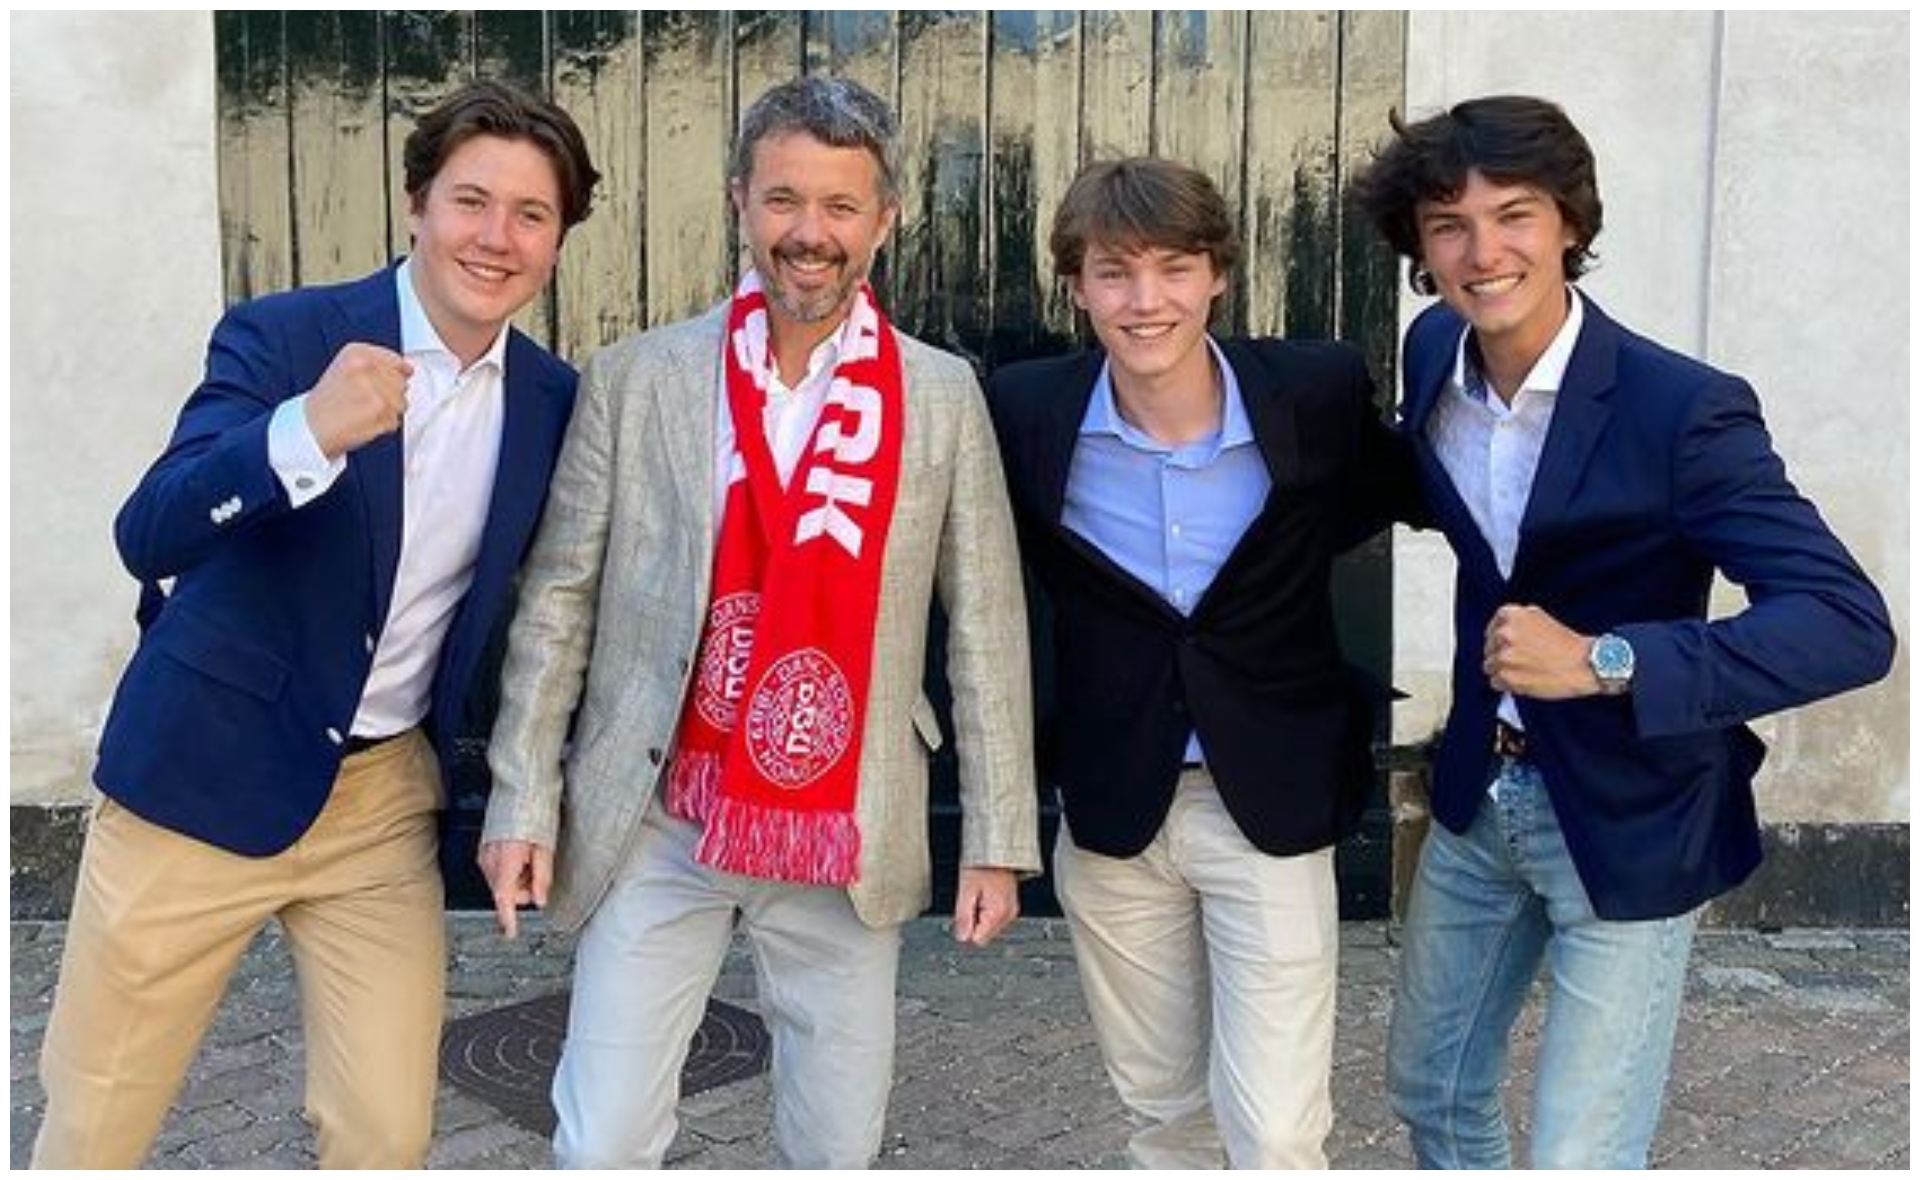 Crown Prince Frederik and his royal relatives reunite with a rare new picture – in the name of football